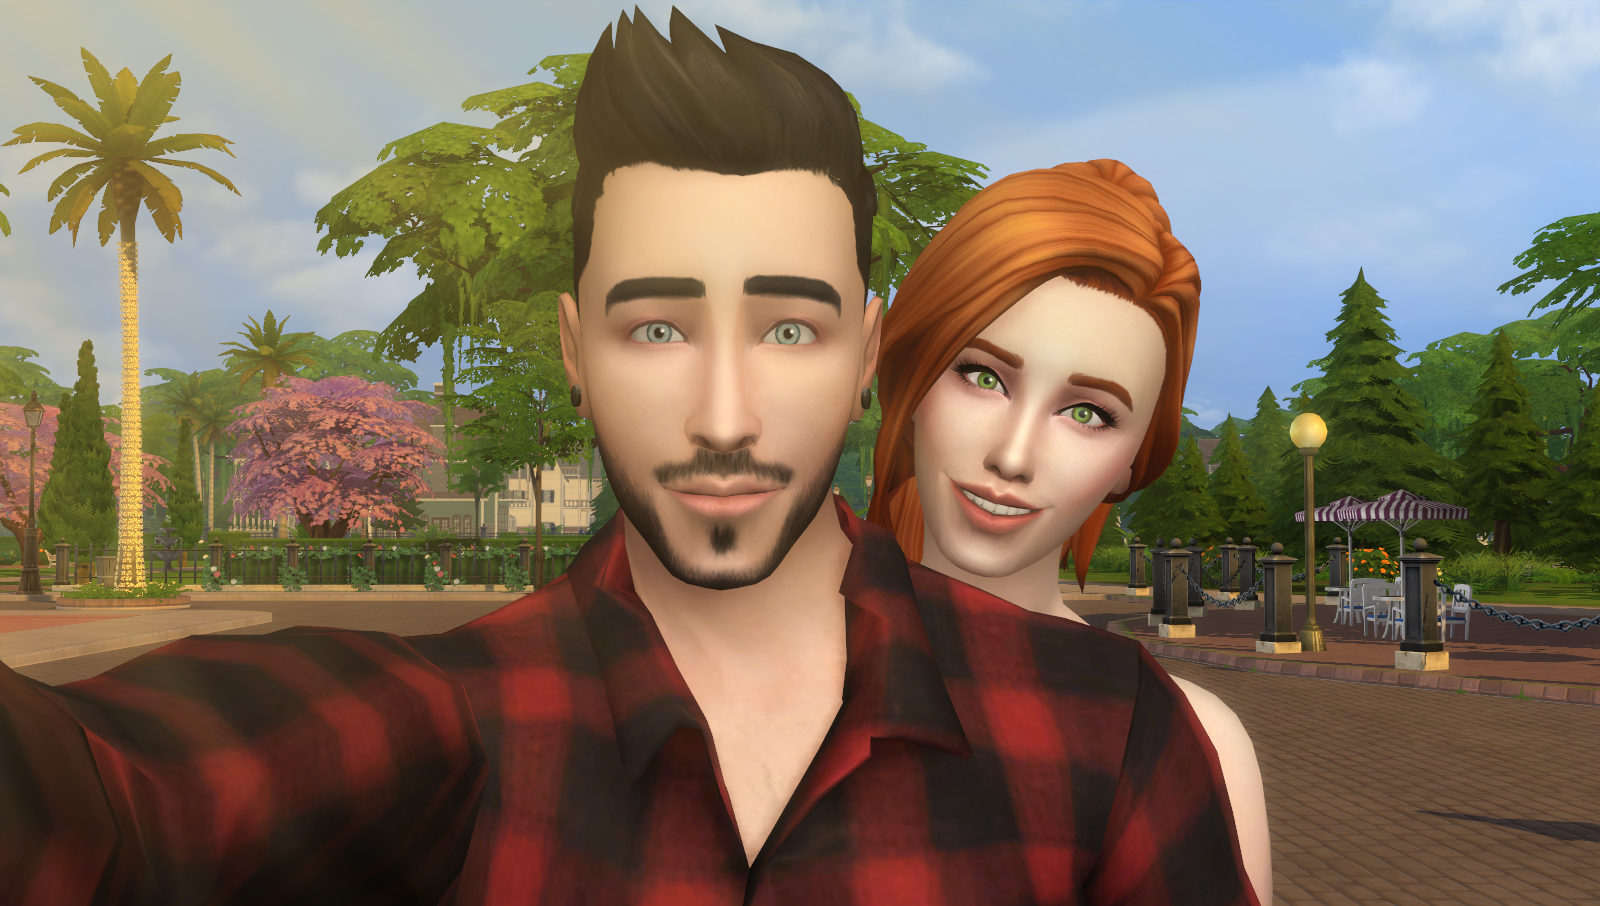 The Sims 4 ID: Soulmate Selfie Pose Pack - Set 5 • Sims 4 